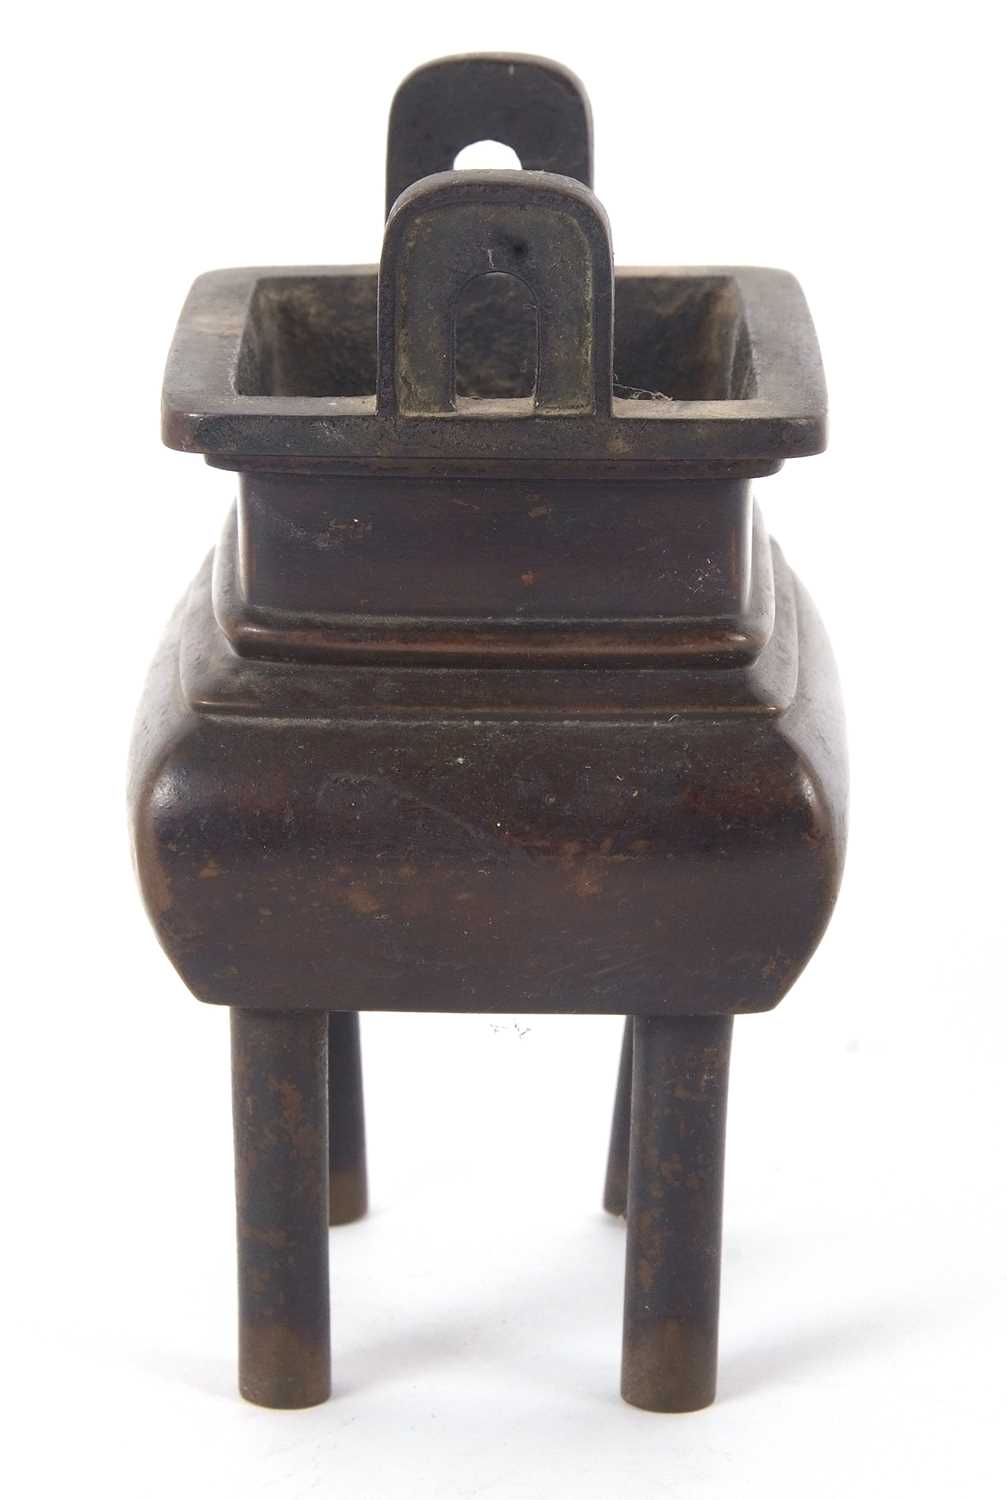 Incense burner of Archaistic form mounted on four legs, 16cm high - Image 7 of 15